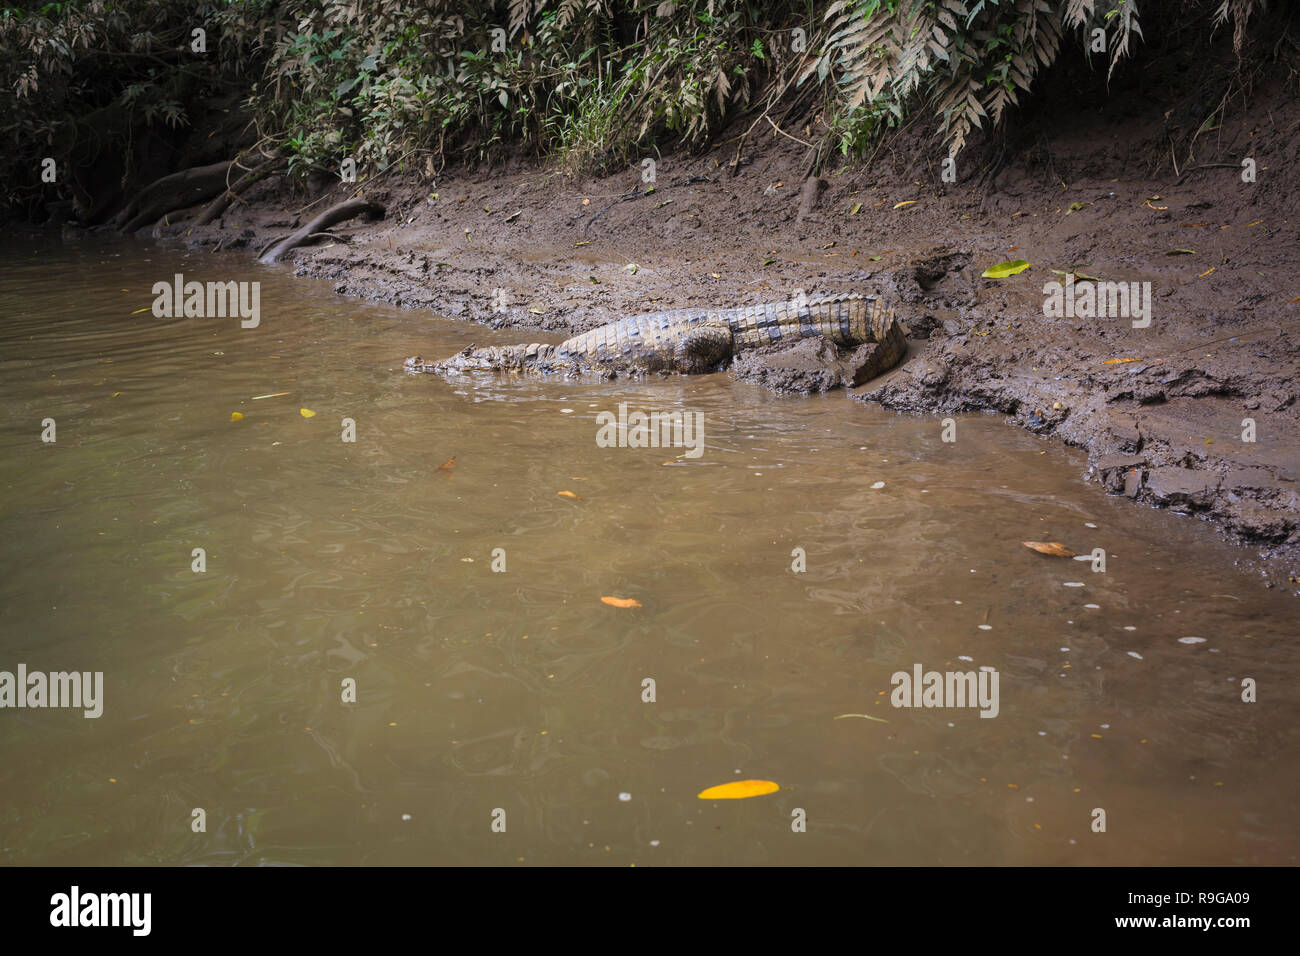 Spectacled Caiman (Caiman crocodilus) on shore. Puerto Viejo river. Heredia province. Costa Rica. Stock Photo